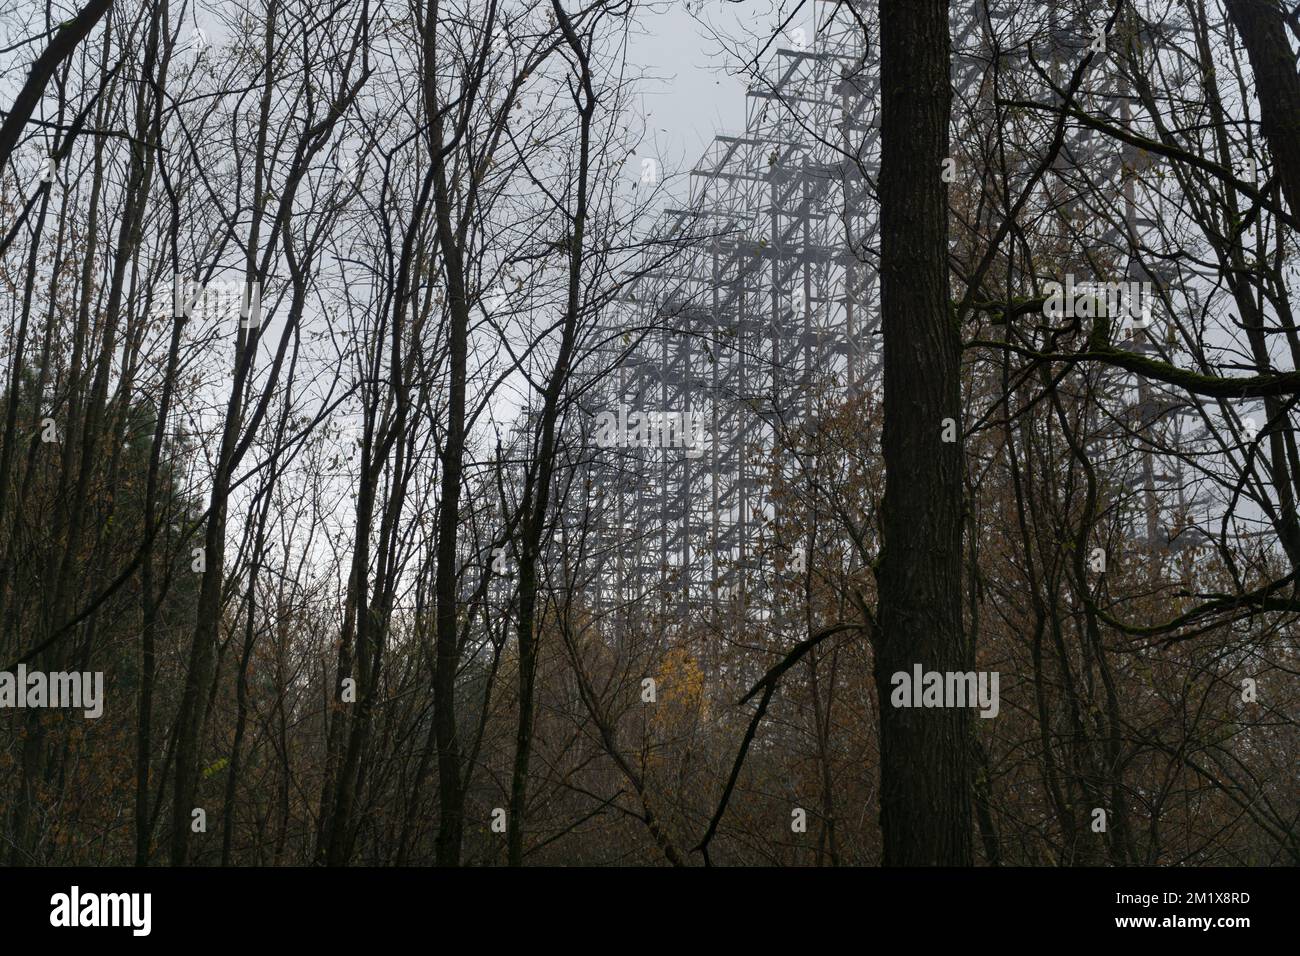 OTH anti air missile defense system viewed through a high branched trees at chernobyl nuclear disaster exclusion zone Stock Photo